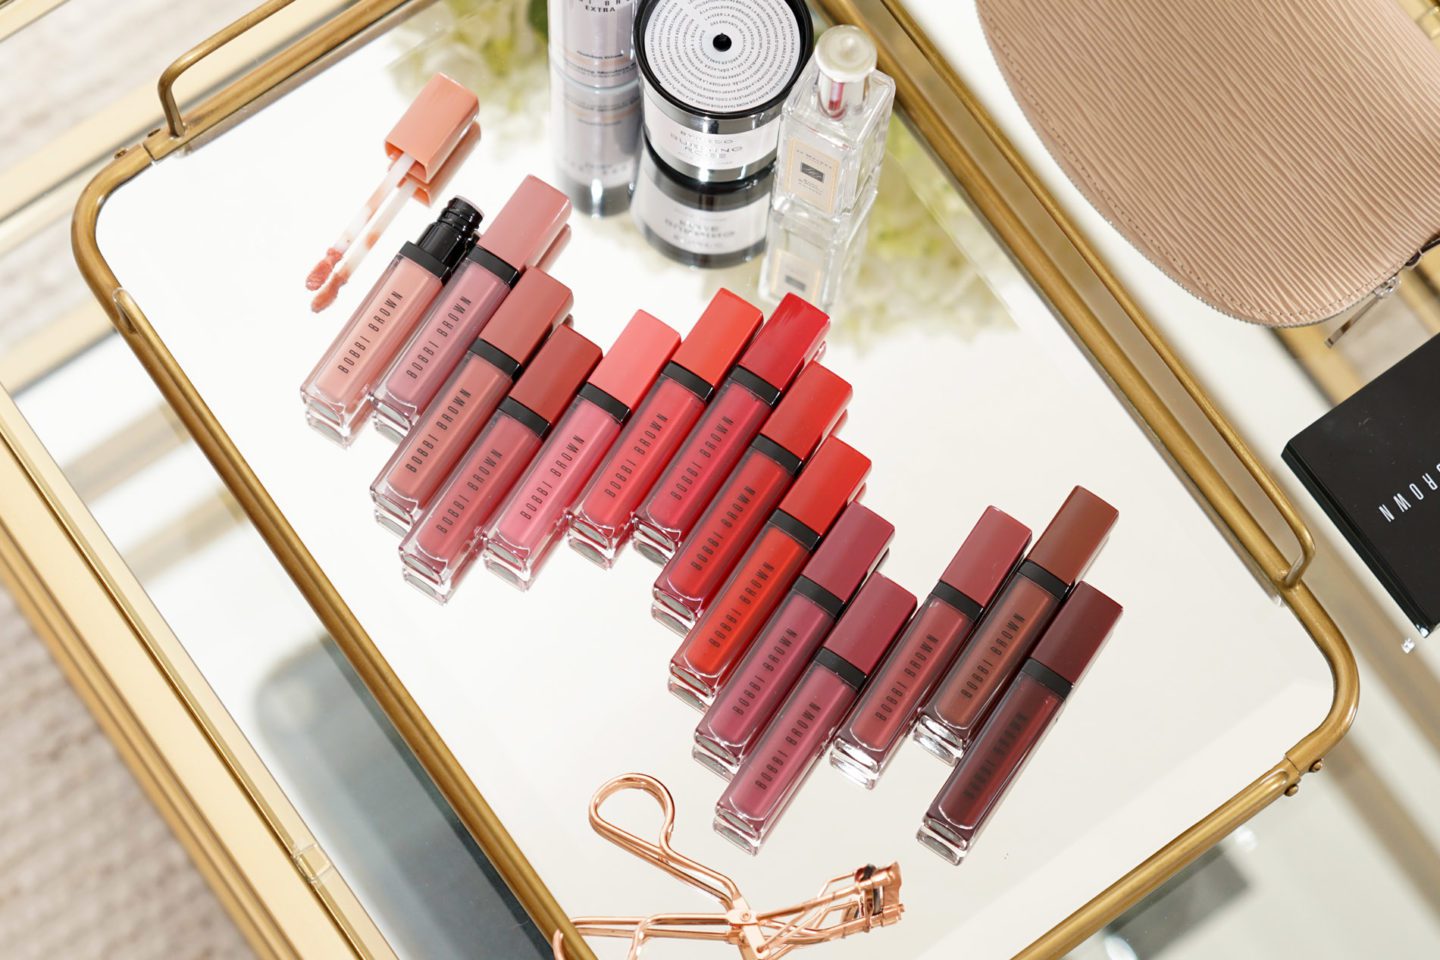 Bobbi Brown Crushed Liquid Lip Balm Review Swatches | The Beauty Look Book